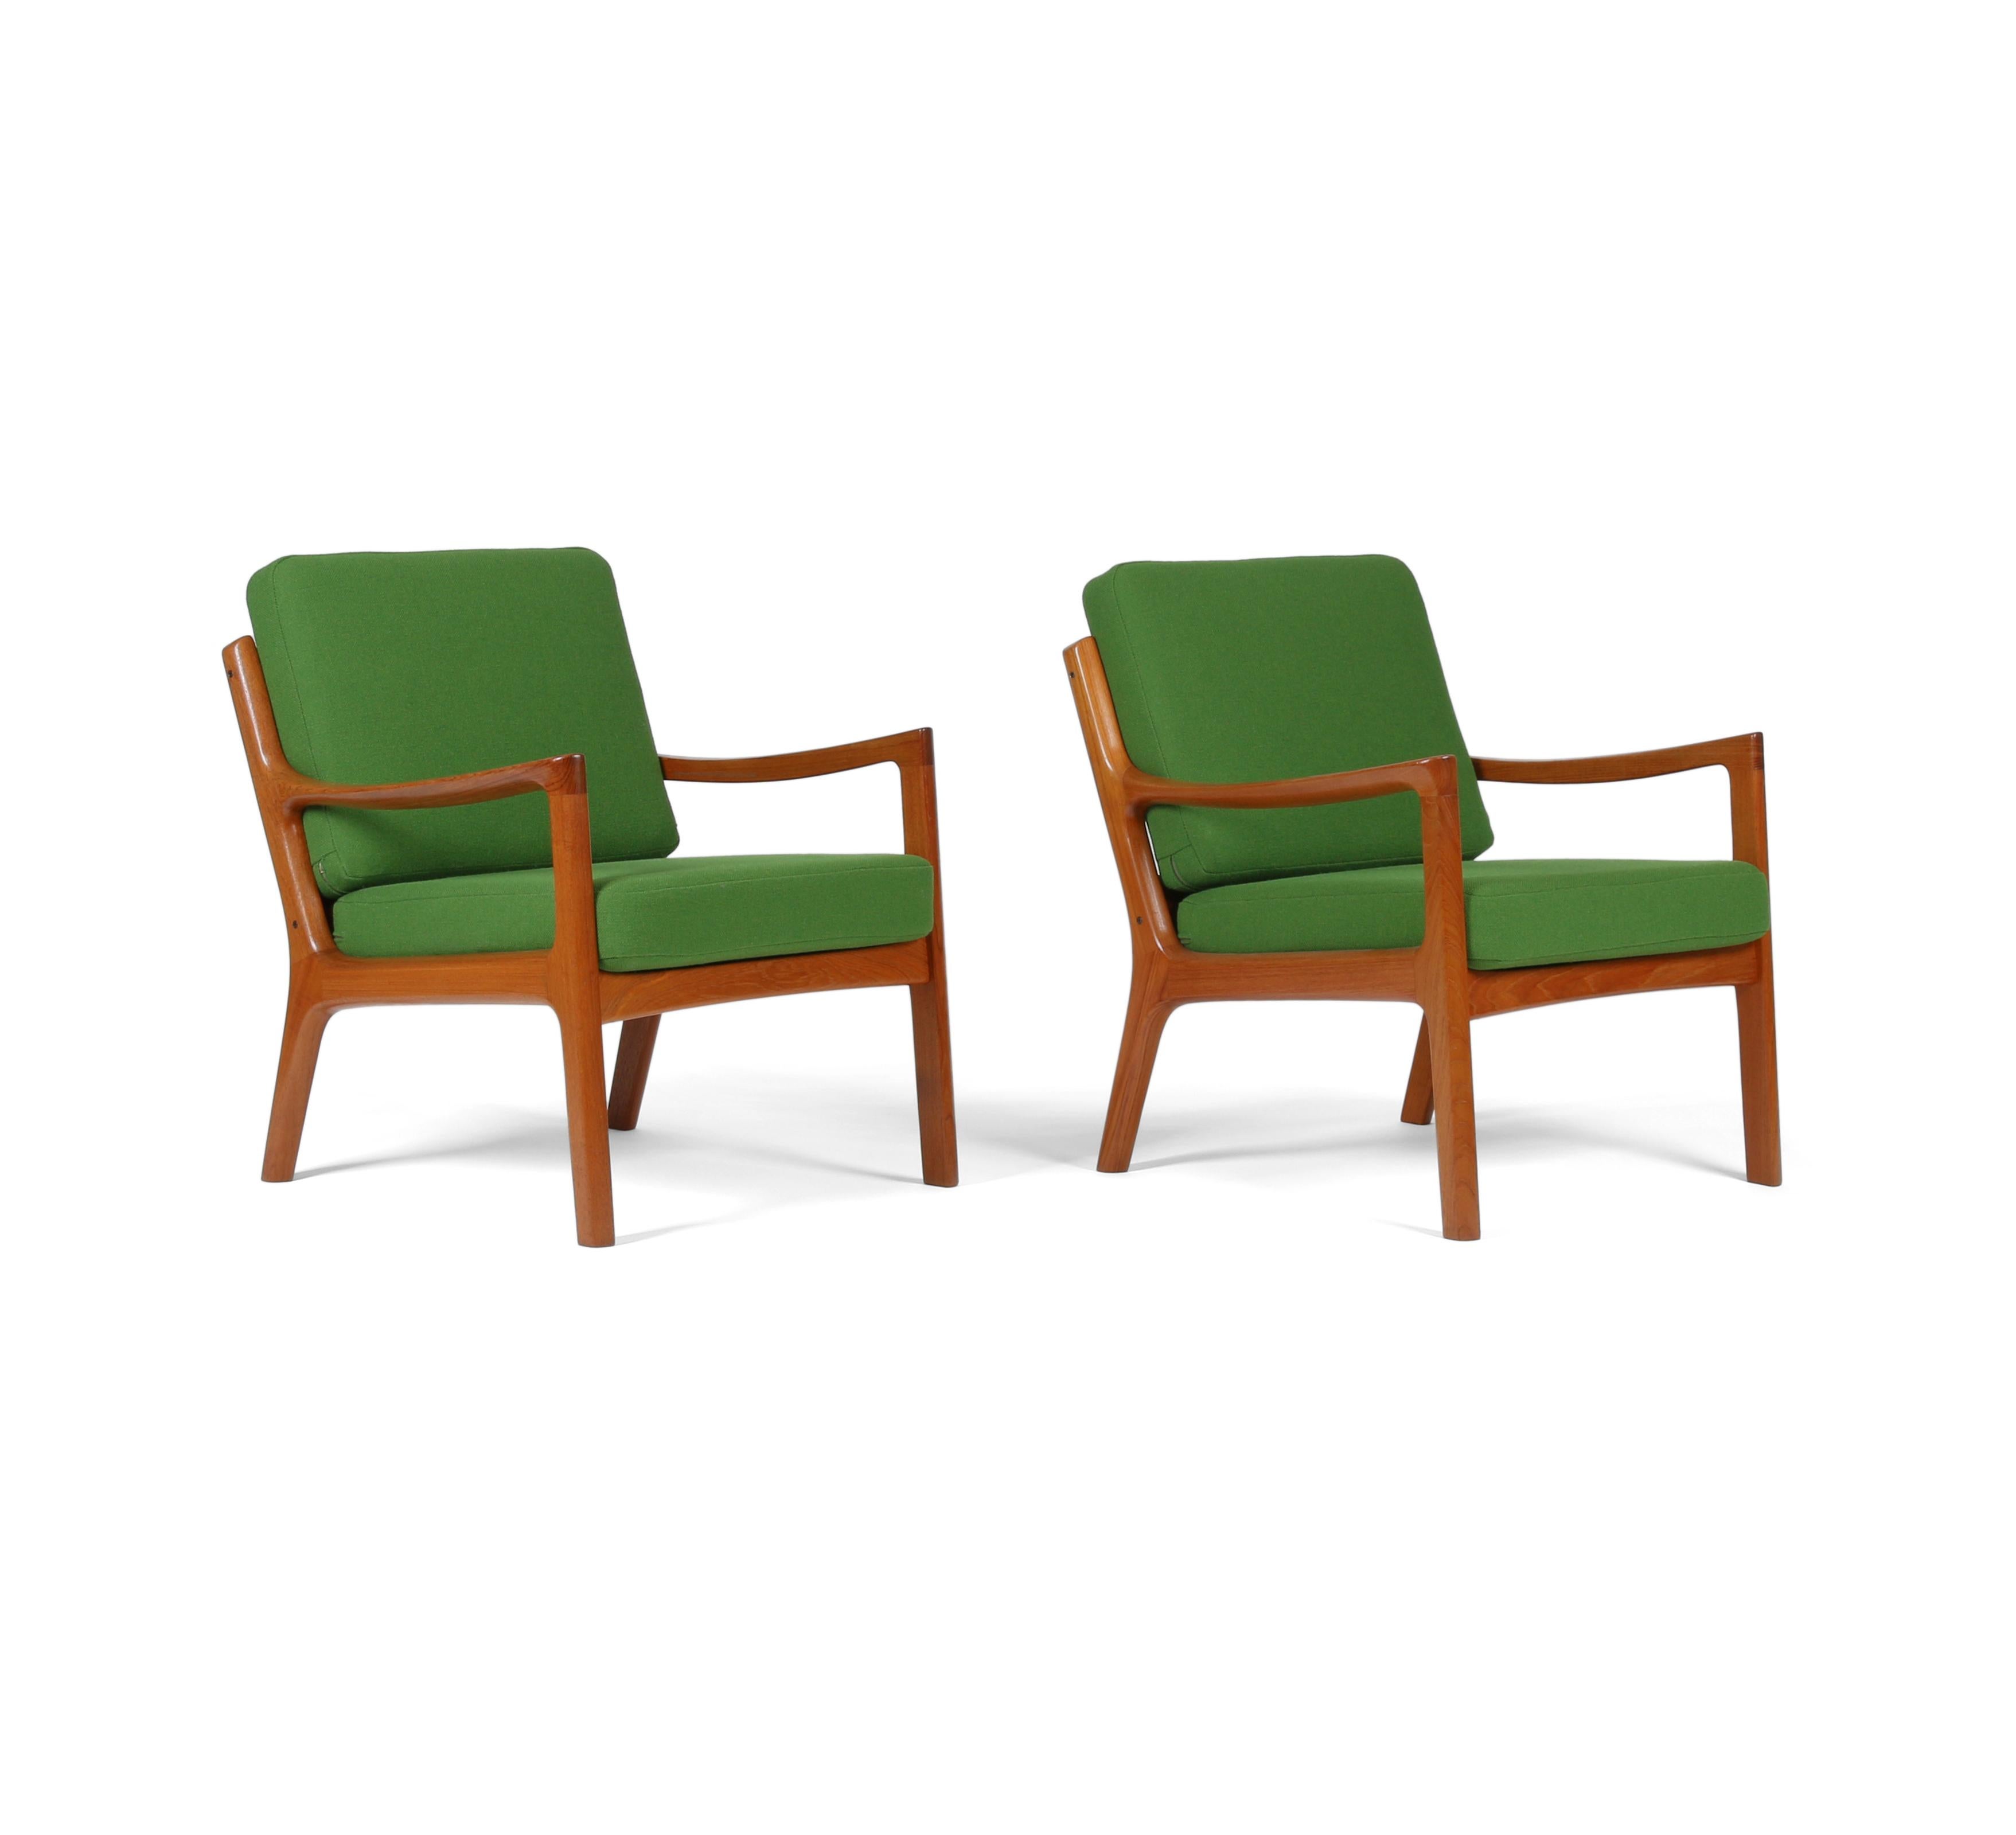 Here is a pair of Danish teak armchairs by Ole Wanscher for France and Søn. This set of “Senator” / No. 166 model lounge chairs was produced in Denmark in the 1960s.

The frames are solid teak with sculptural swooping arms, and have been recently